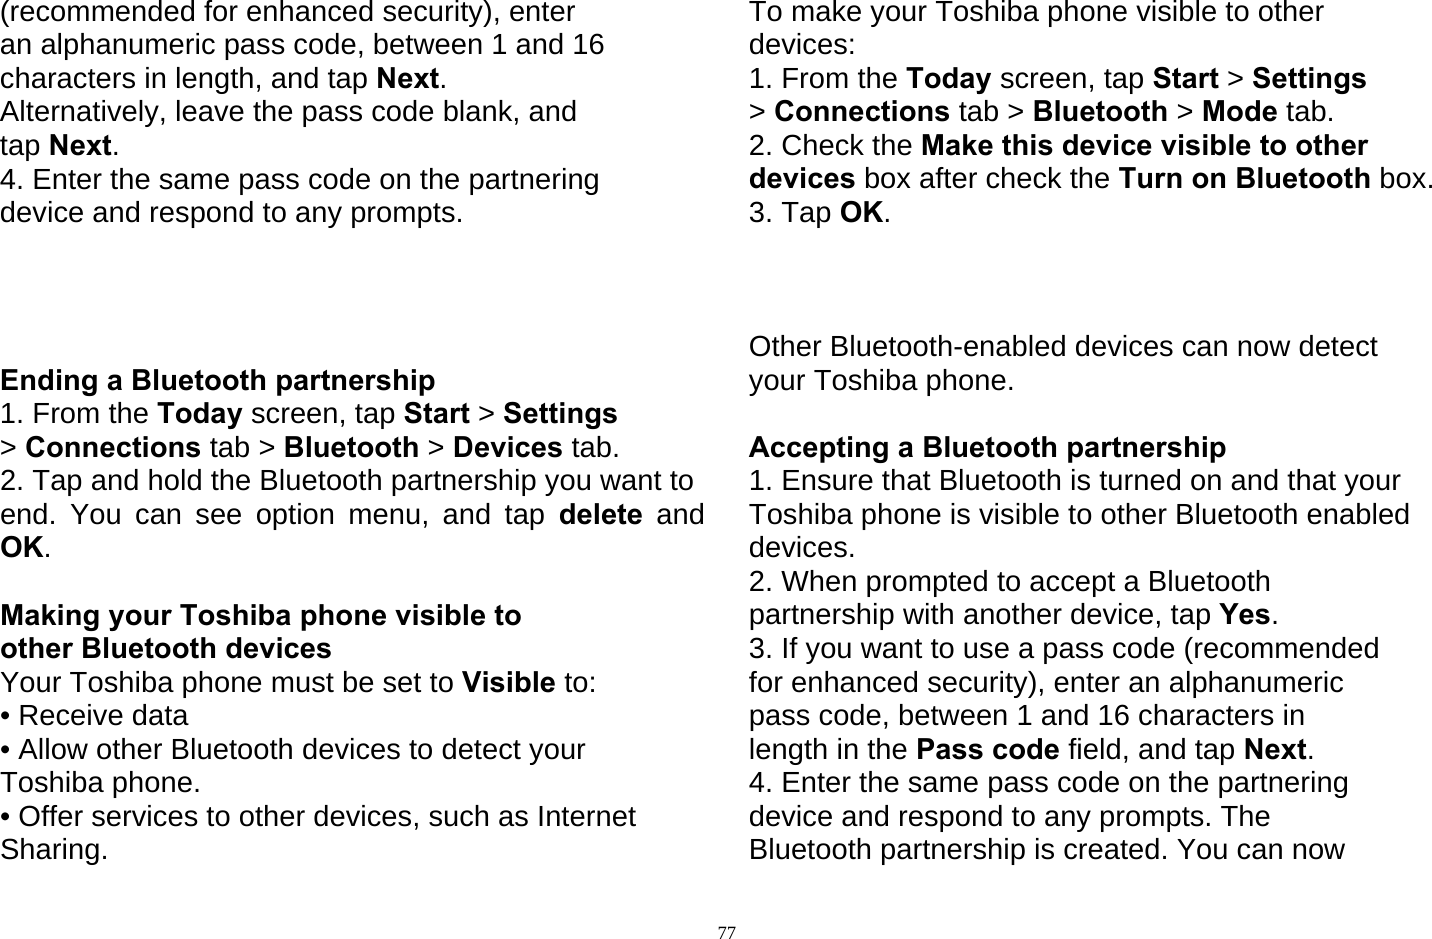   77(recommended for enhanced security), enter an alphanumeric pass code, between 1 and 16 characters in length, and tap Next. Alternatively, leave the pass code blank, and tap Next. 4. Enter the same pass code on the partnering device and respond to any prompts.     Ending a Bluetooth partnership 1. From the Today screen, tap Start &gt; Settings &gt; Connections tab &gt; Bluetooth &gt; Devices tab. 2. Tap and hold the Bluetooth partnership you want to end. You can see option menu, and tap delete and OK.  Making your Toshiba phone visible to other Bluetooth devices Your Toshiba phone must be set to Visible to: • Receive data • Allow other Bluetooth devices to detect your Toshiba phone. • Offer services to other devices, such as Internet Sharing. To make your Toshiba phone visible to other devices: 1. From the Today screen, tap Start &gt; Settings &gt; Connections tab &gt; Bluetooth &gt; Mode tab. 2. Check the Make this device visible to other devices box after check the Turn on Bluetooth box. 3. Tap OK.    Other Bluetooth-enabled devices can now detect your Toshiba phone.  Accepting a Bluetooth partnership 1. Ensure that Bluetooth is turned on and that your Toshiba phone is visible to other Bluetooth enabled devices. 2. When prompted to accept a Bluetooth partnership with another device, tap Yes. 3. If you want to use a pass code (recommended for enhanced security), enter an alphanumeric pass code, between 1 and 16 characters in length in the Pass code field, and tap Next. 4. Enter the same pass code on the partnering device and respond to any prompts. The Bluetooth partnership is created. You can now 